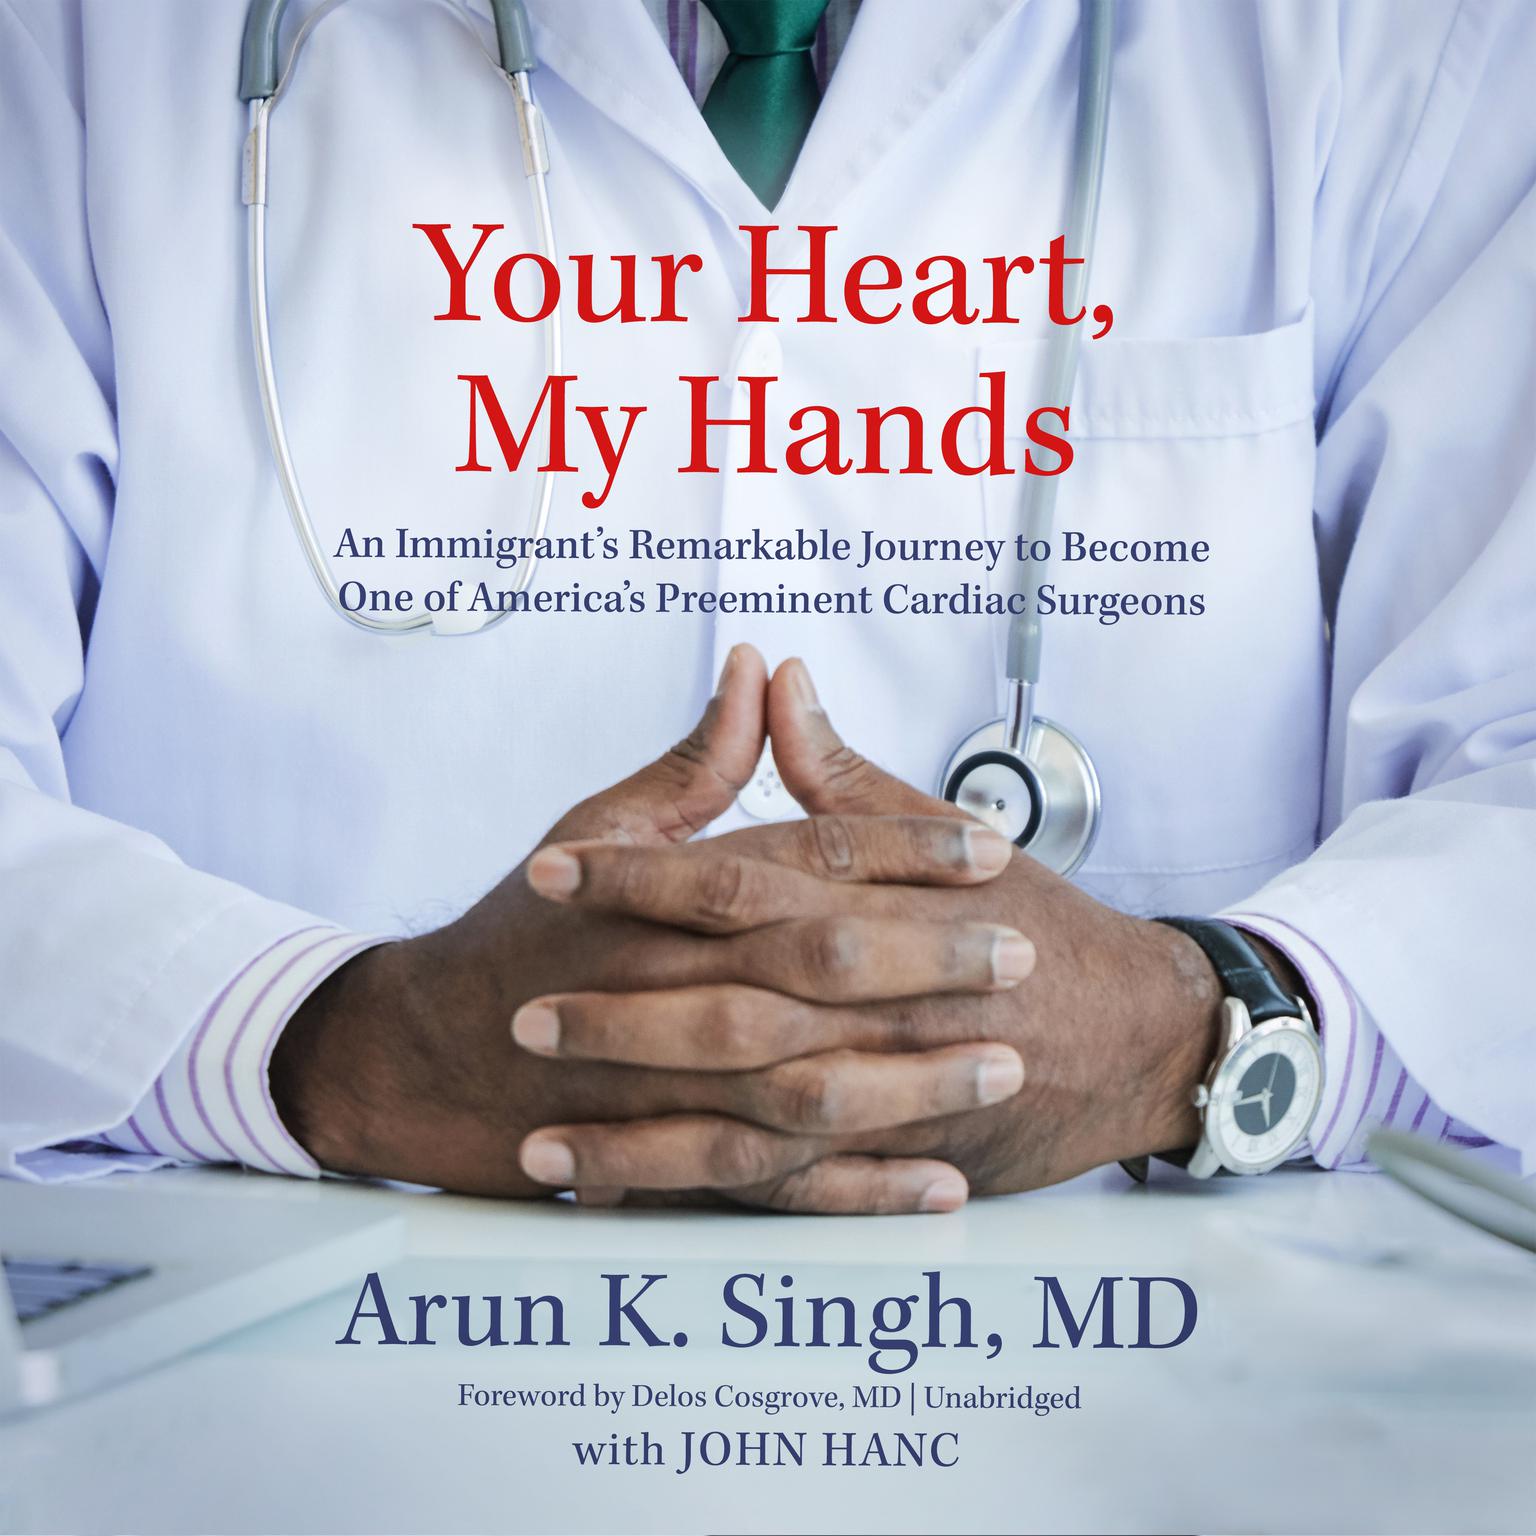 Your Heart, My Hands: An Immigrant’s Remarkable Journey to Become One of America’s Preeminent Cardiac Surgeons  Audiobook, by Arun K. Singh